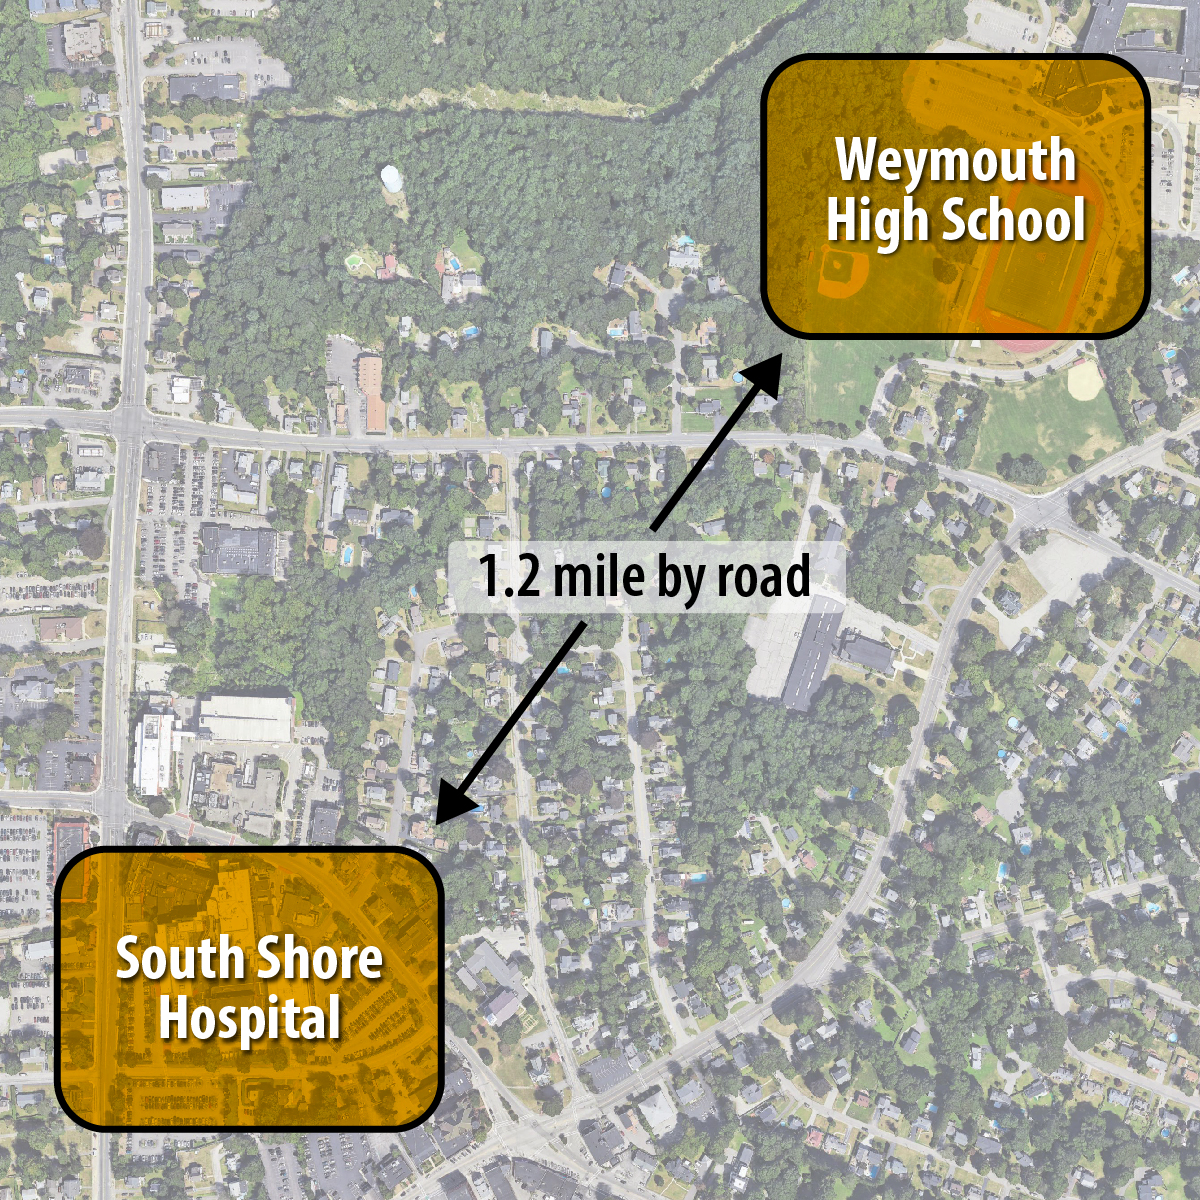 Map showing distance from hospital to high school